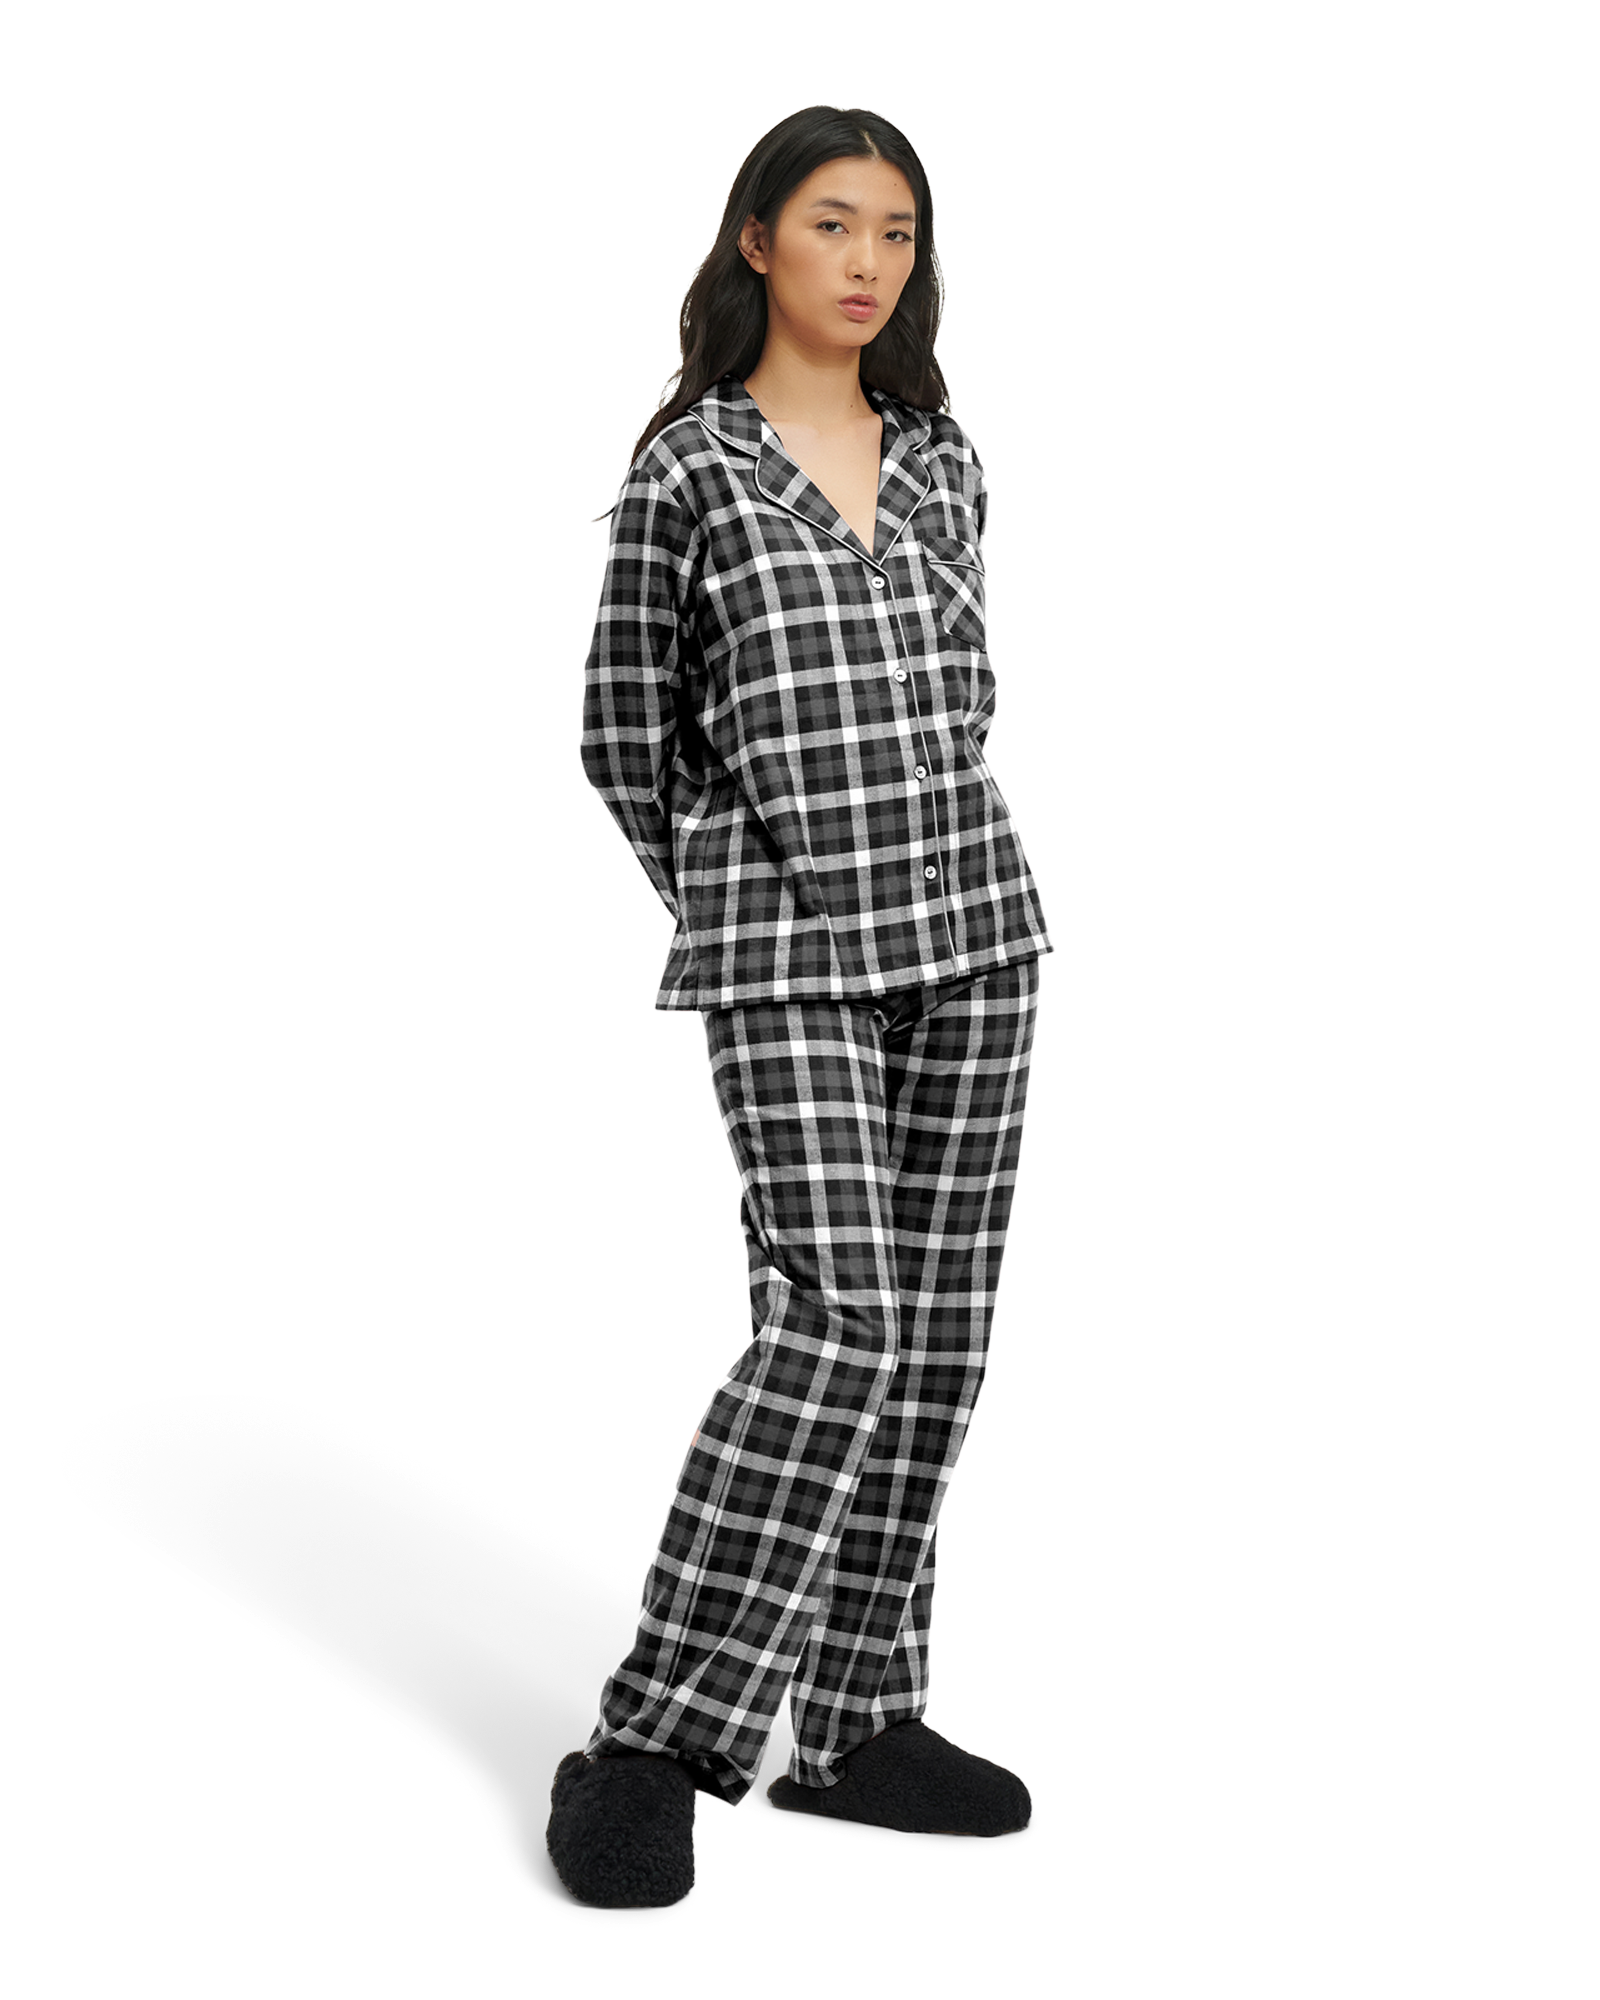 UGG Ophilia Pyjama Set for Women in Black/White Check, Size Large, Cotton